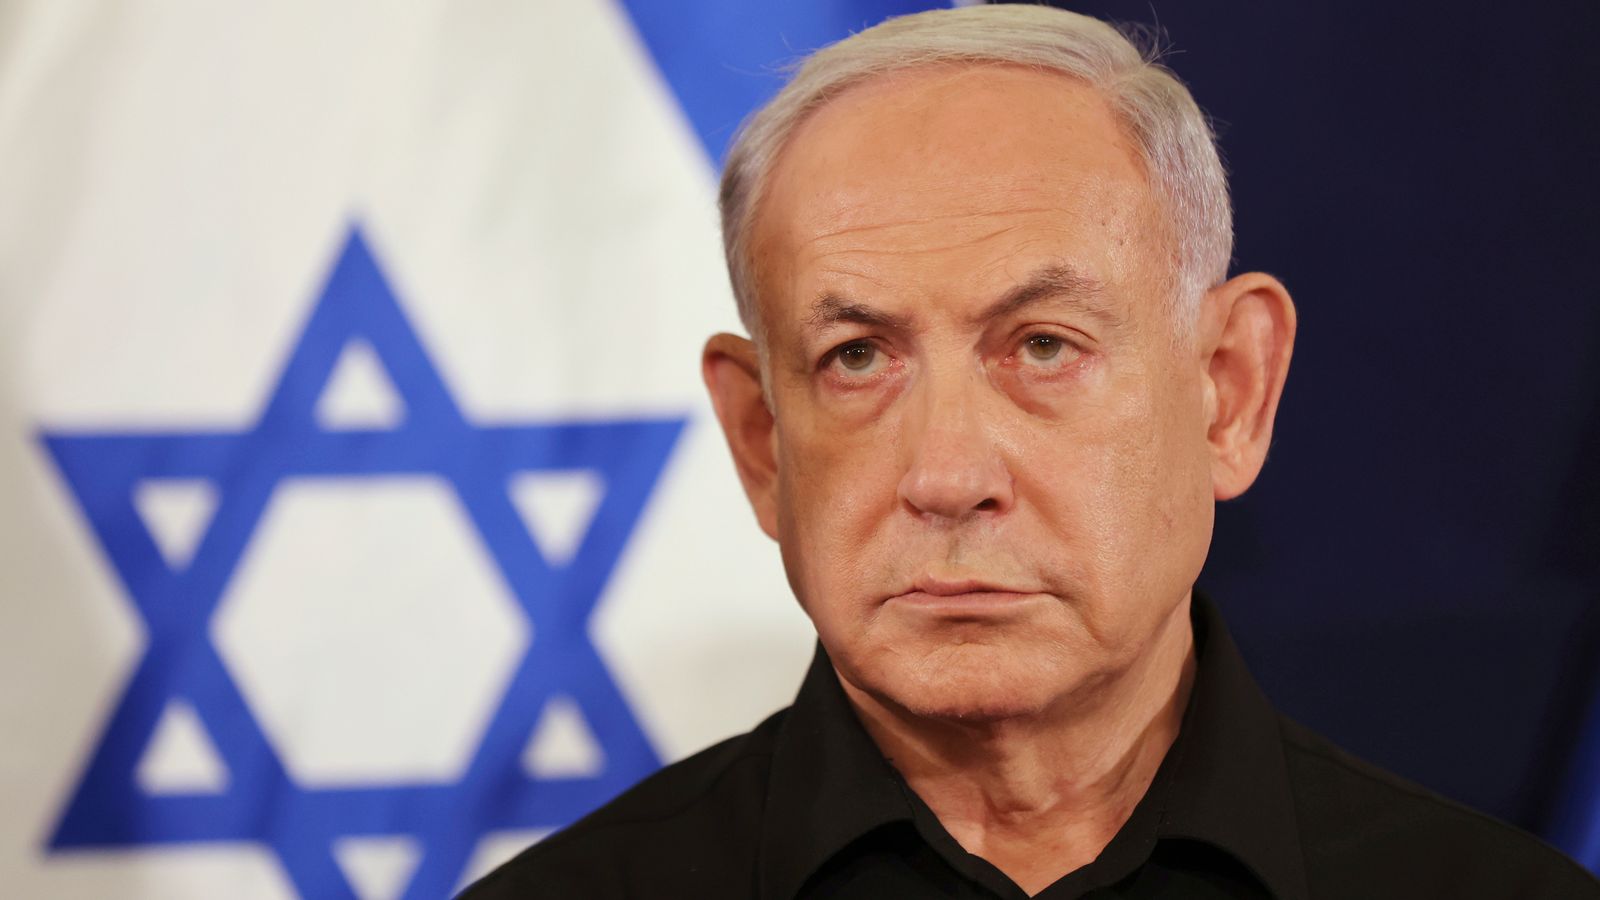 netanyahu's gaza plan appears to be attempt to delay inevitable removal from office